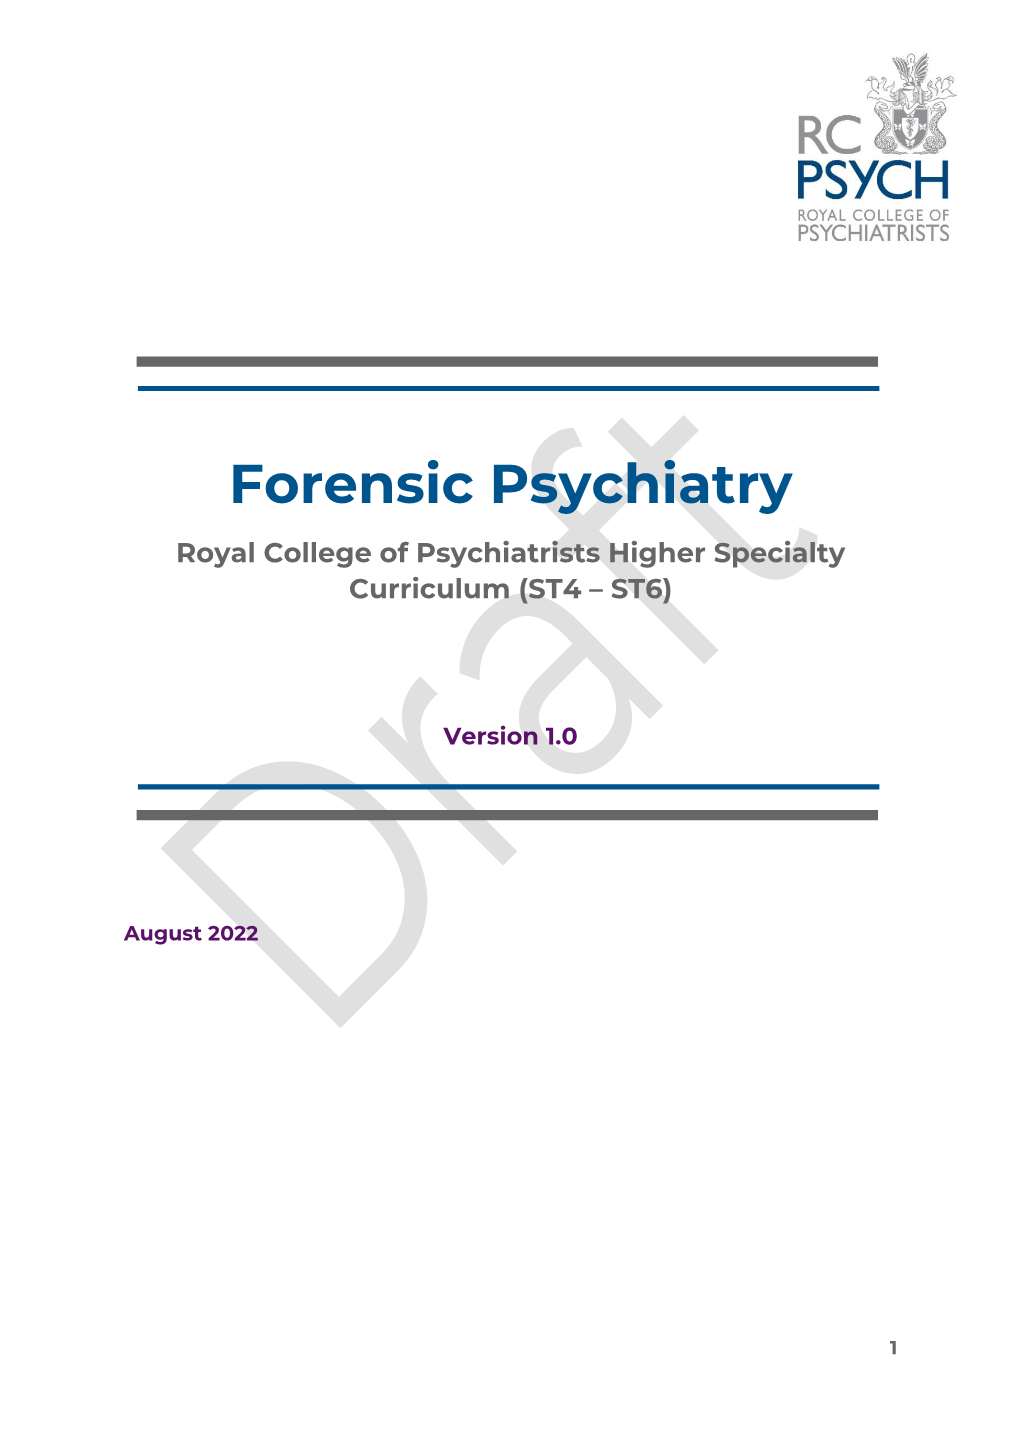 Forensic Psychiatry Royal College of Psychiatrists Higher Specialty Curriculum (ST4 – ST6)